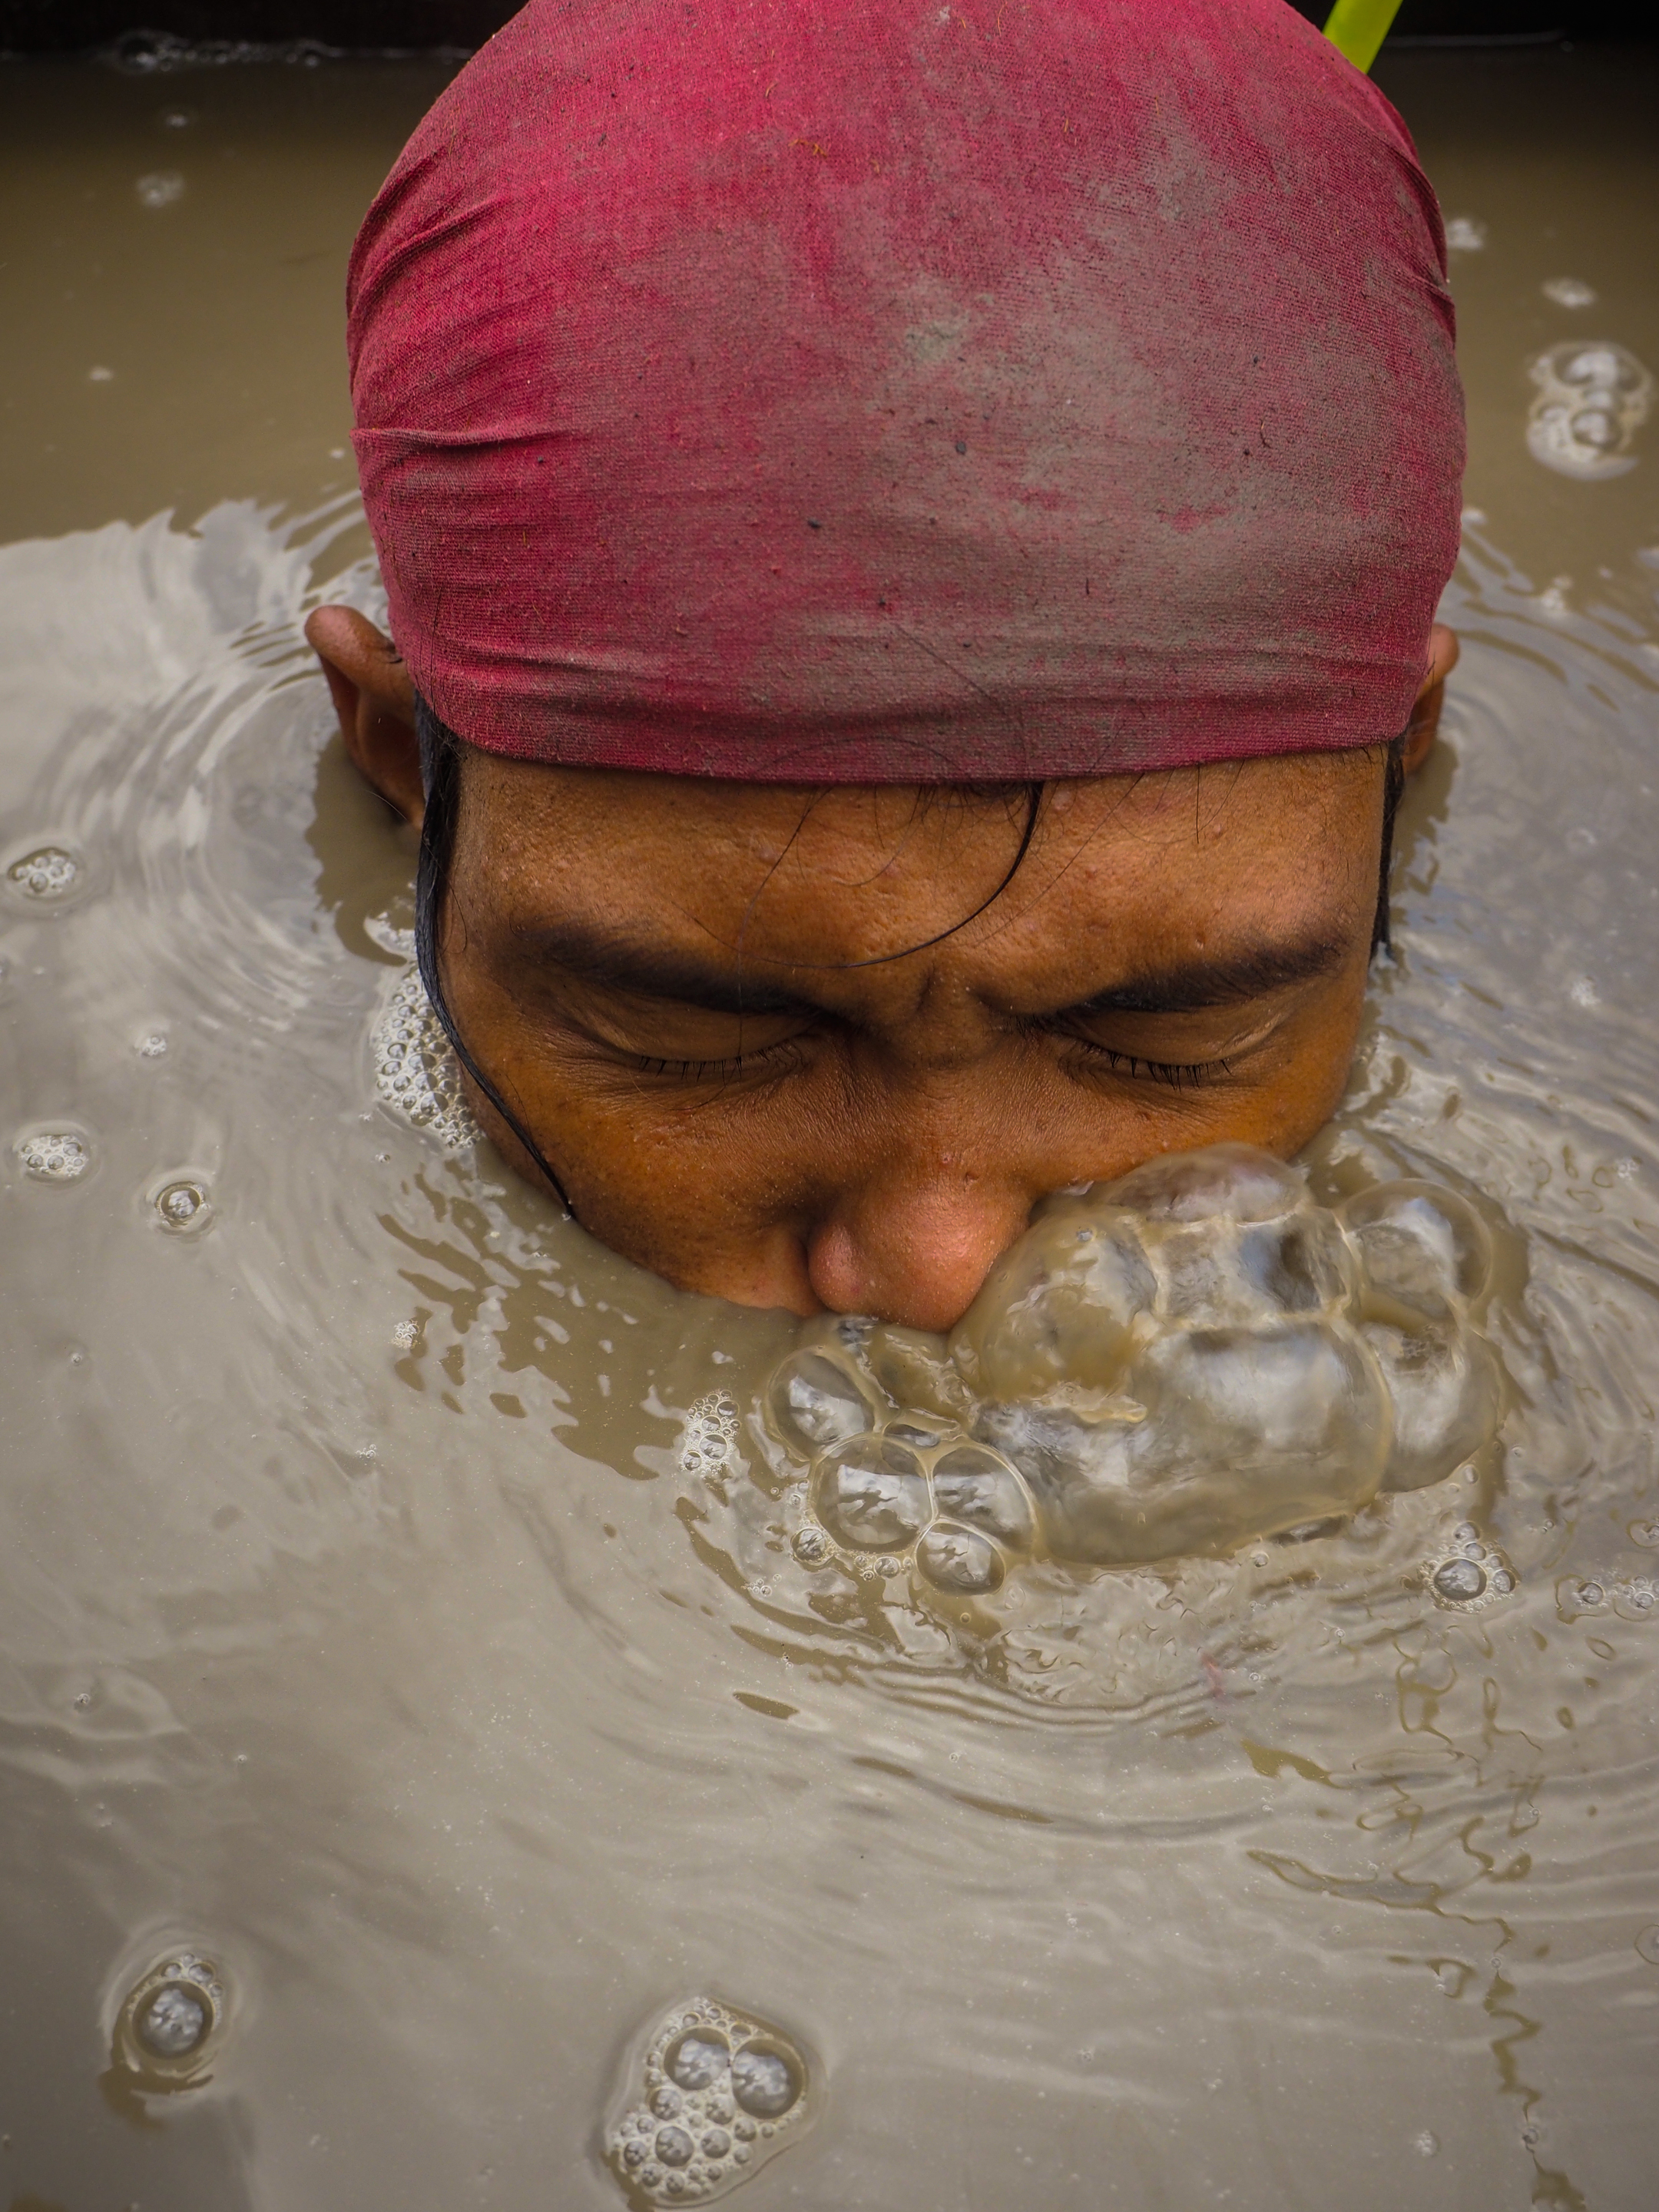 A compressor miner sinks into the muddy water of Mambulao Bay, beginning a dive for ore that can last two or more hours. Image by Larry C. Price. Philippines, 2013.